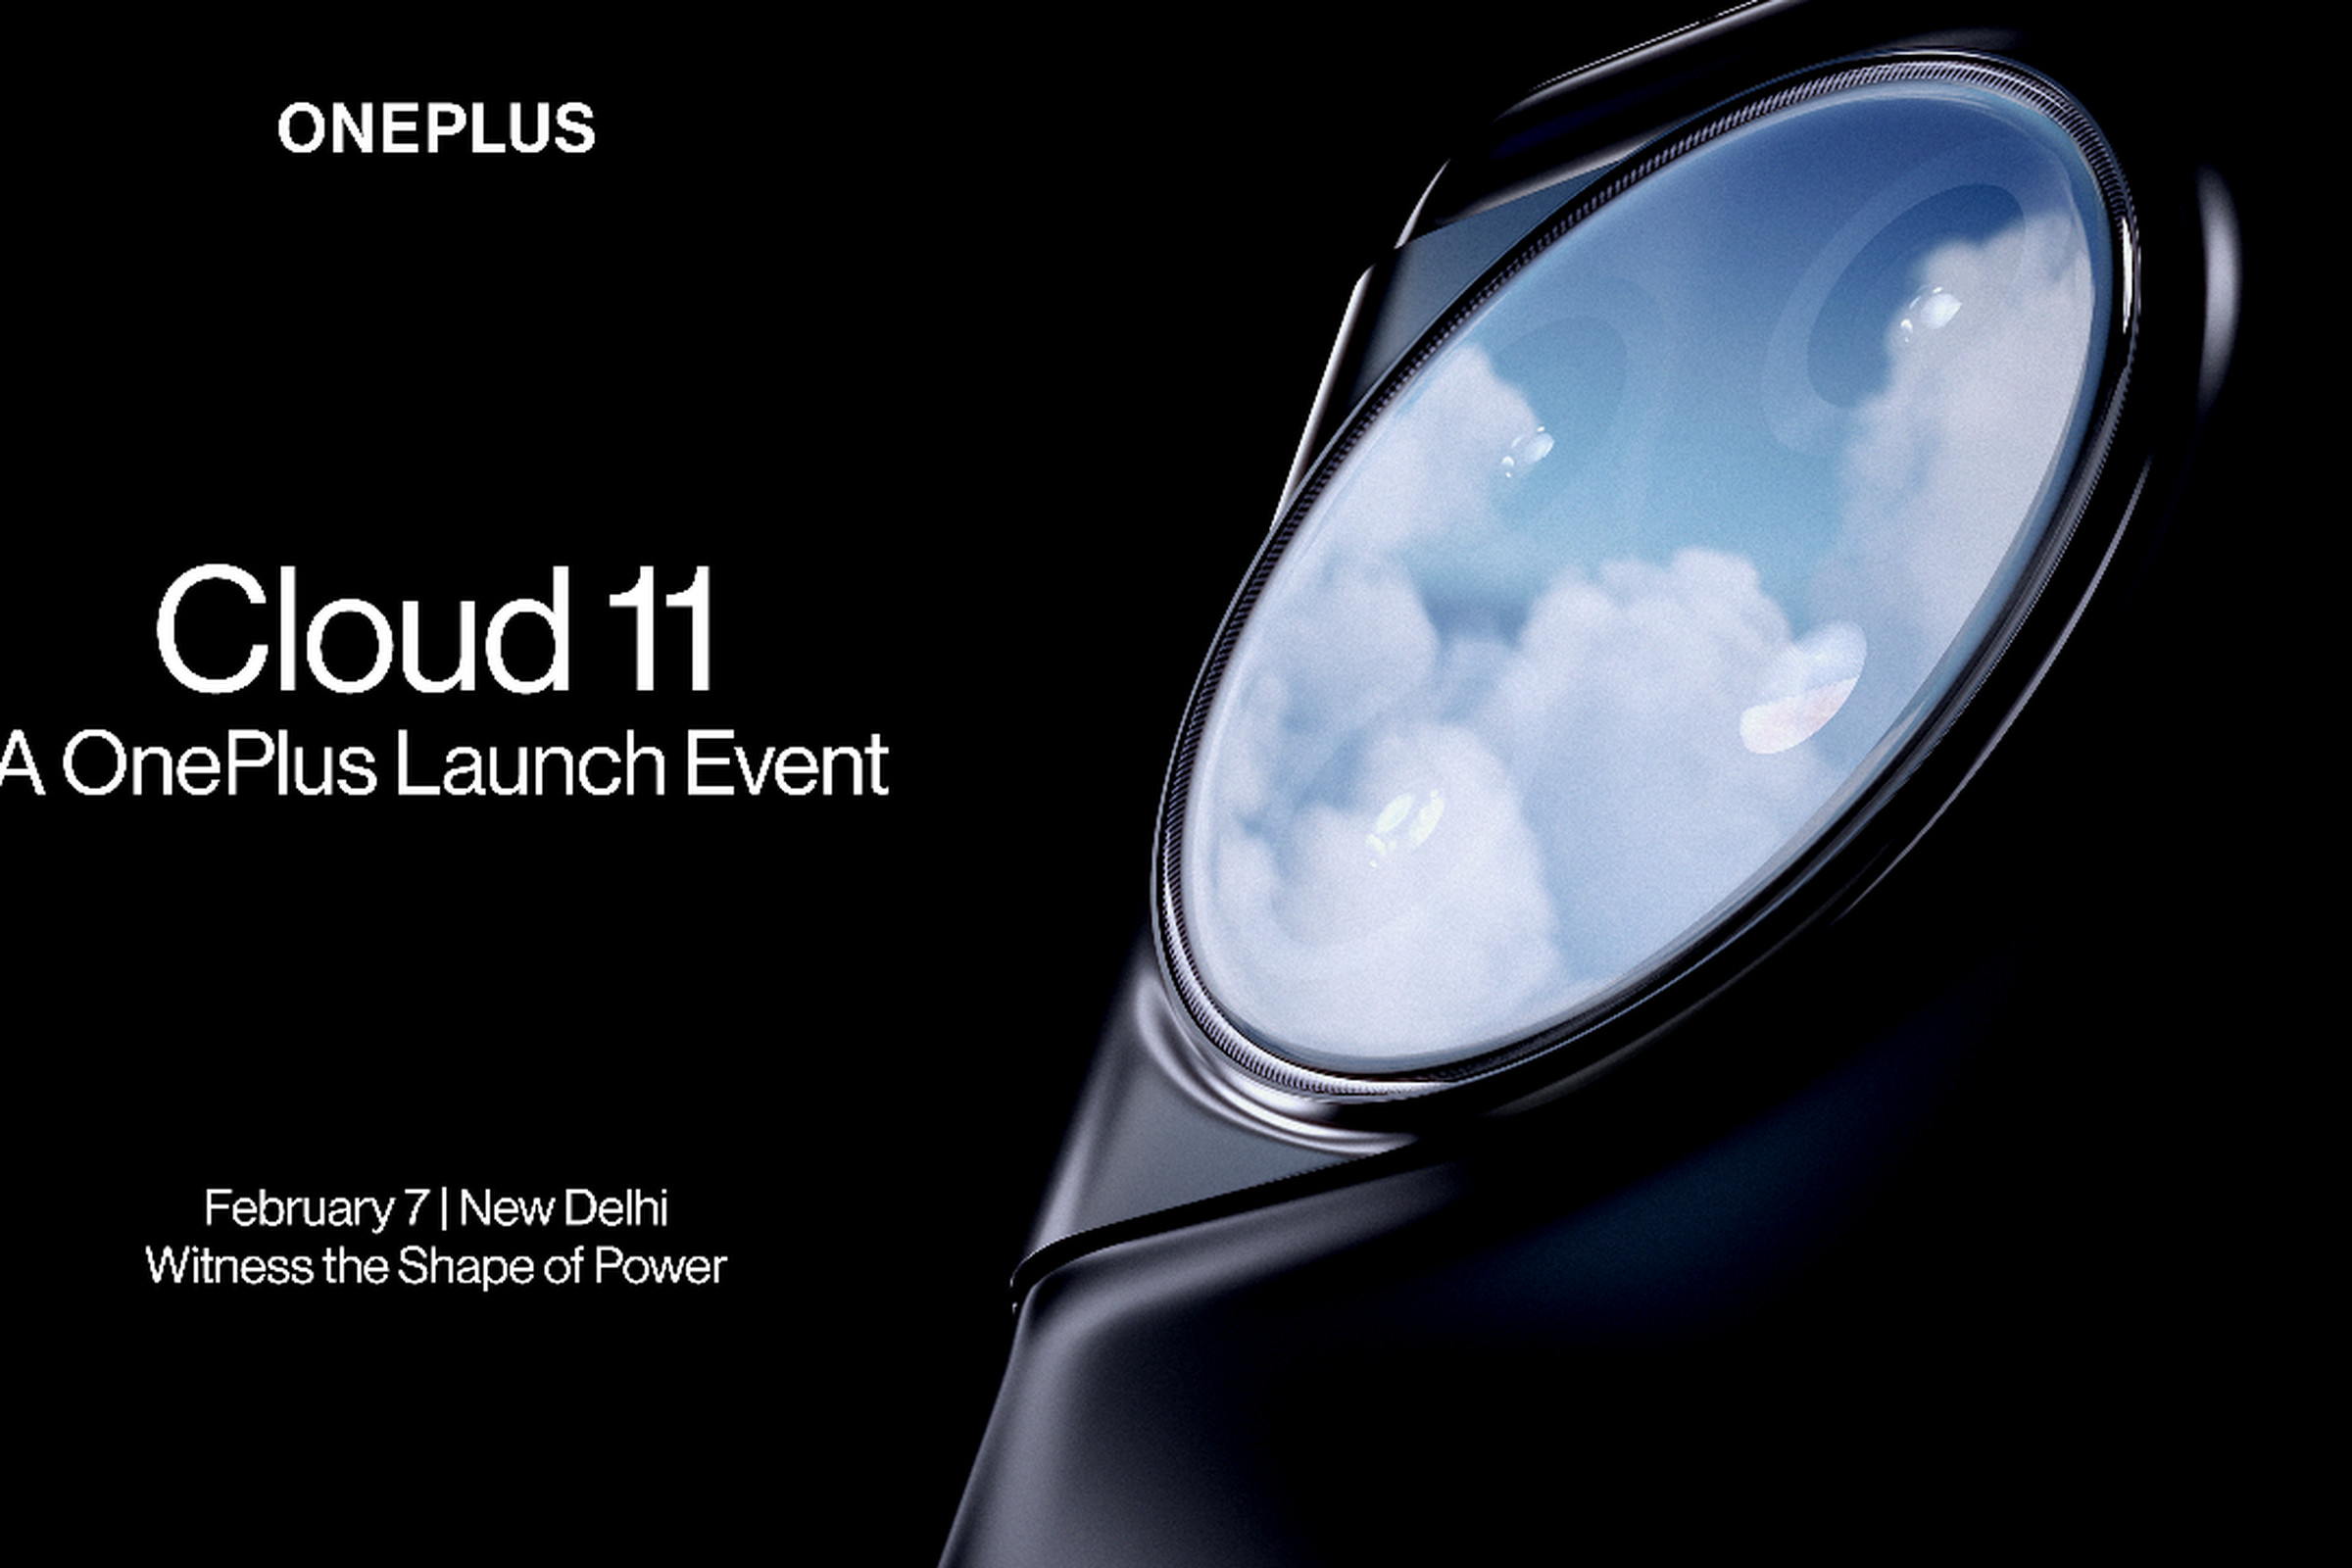 Teaser image for OnePlus 11 showing silhouette of phone with clouds reflected in a large, round camera bump.